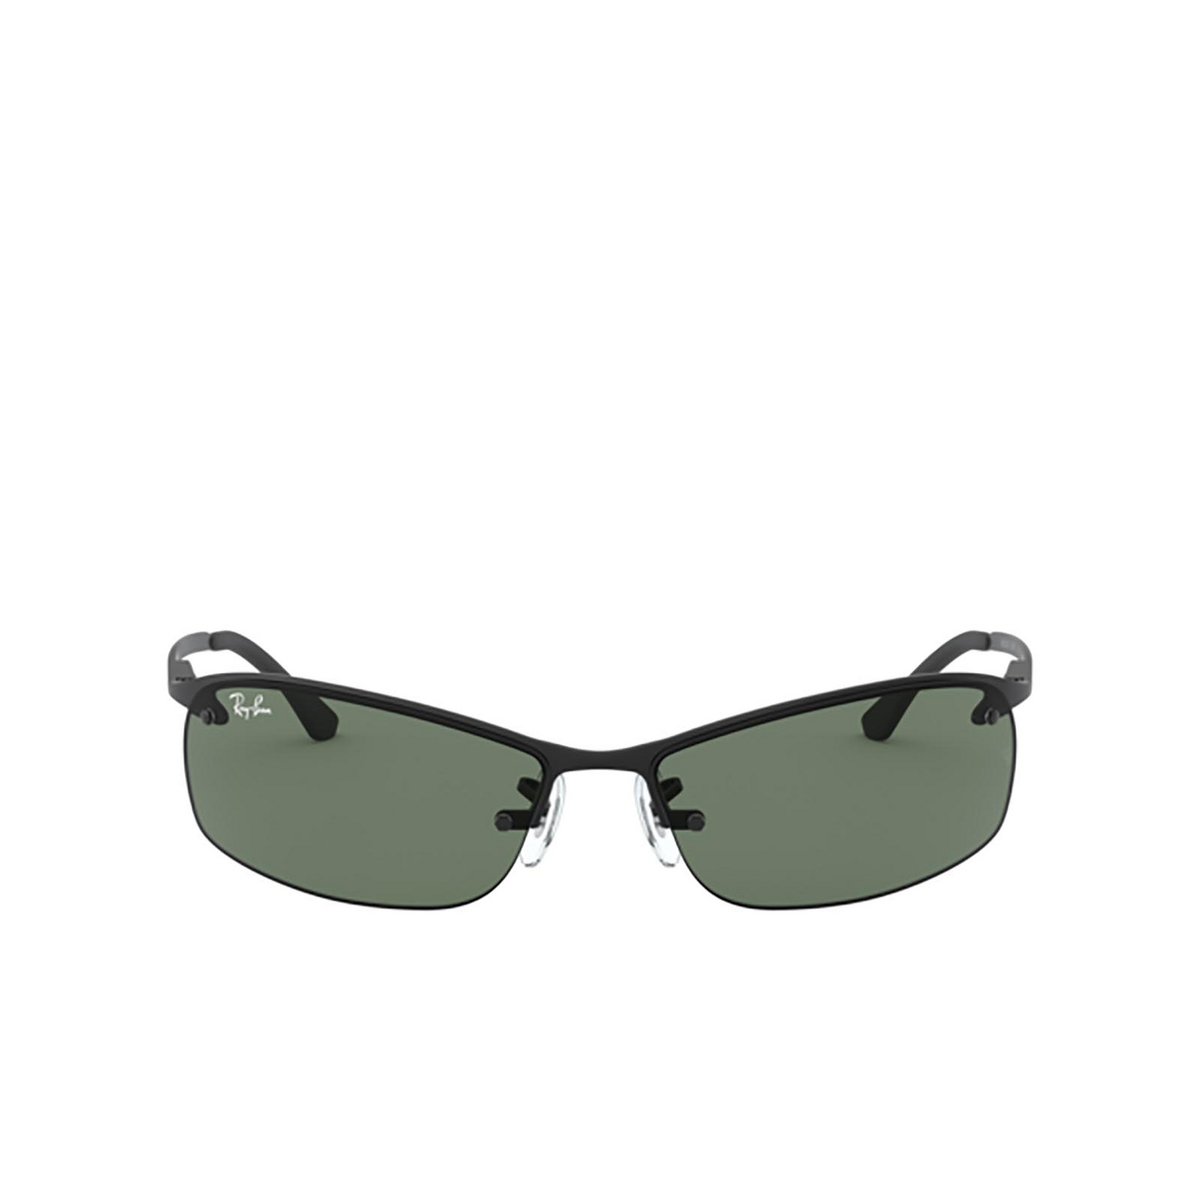 Ray-Ban RB3183 Sunglasses 006/71 MATTE BLACK - front view